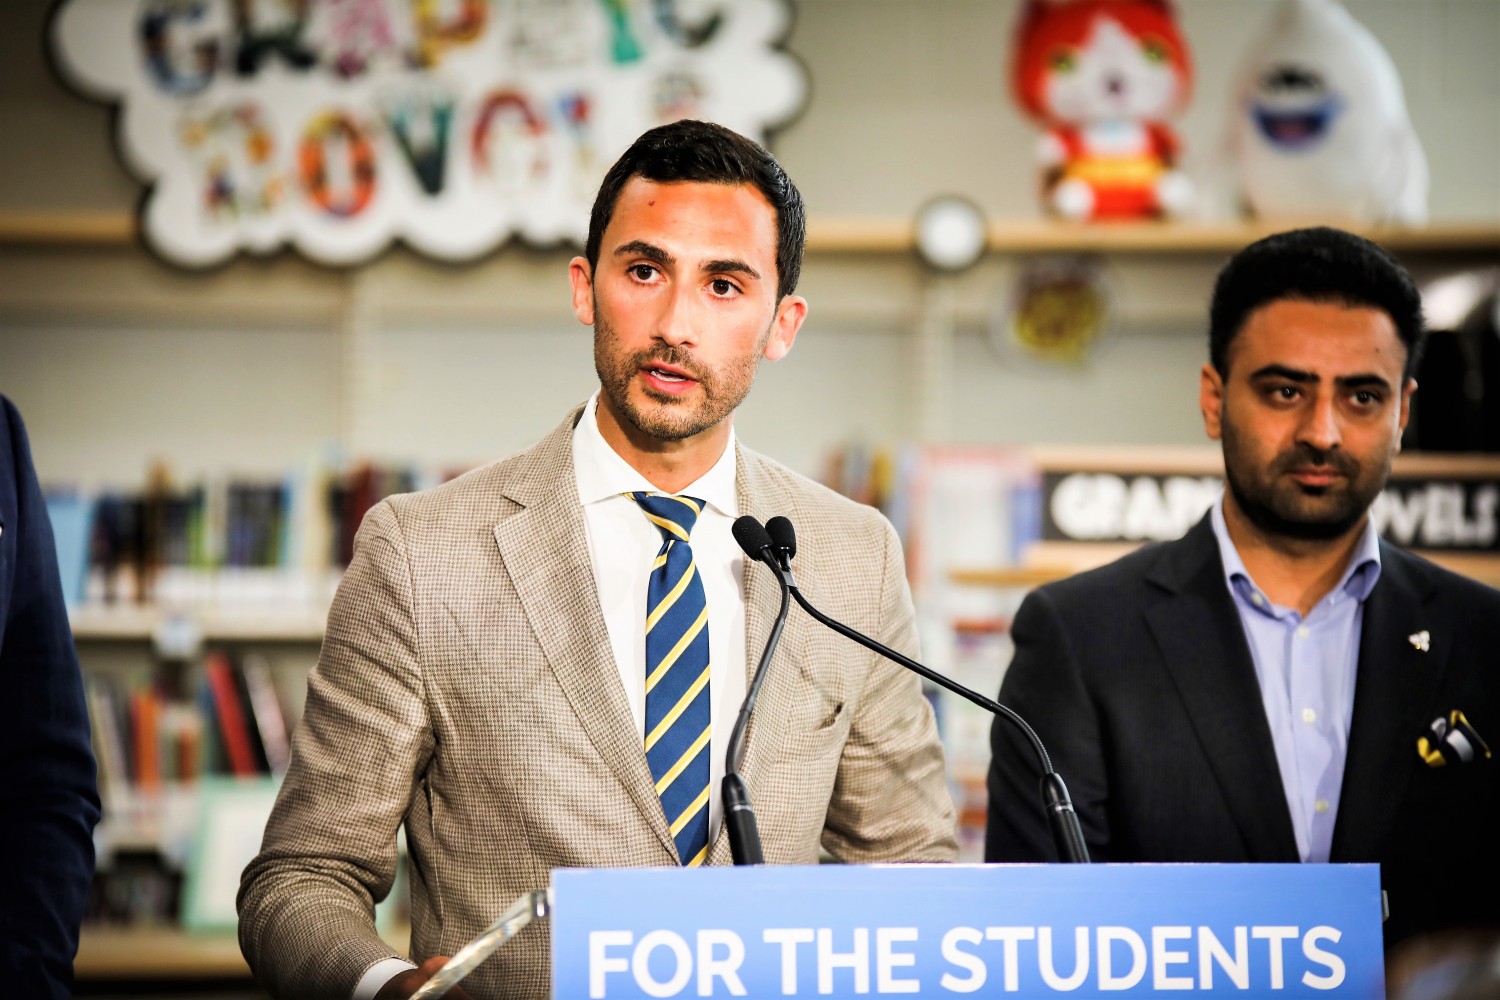 Queen’s Park needs to take over the PDSB